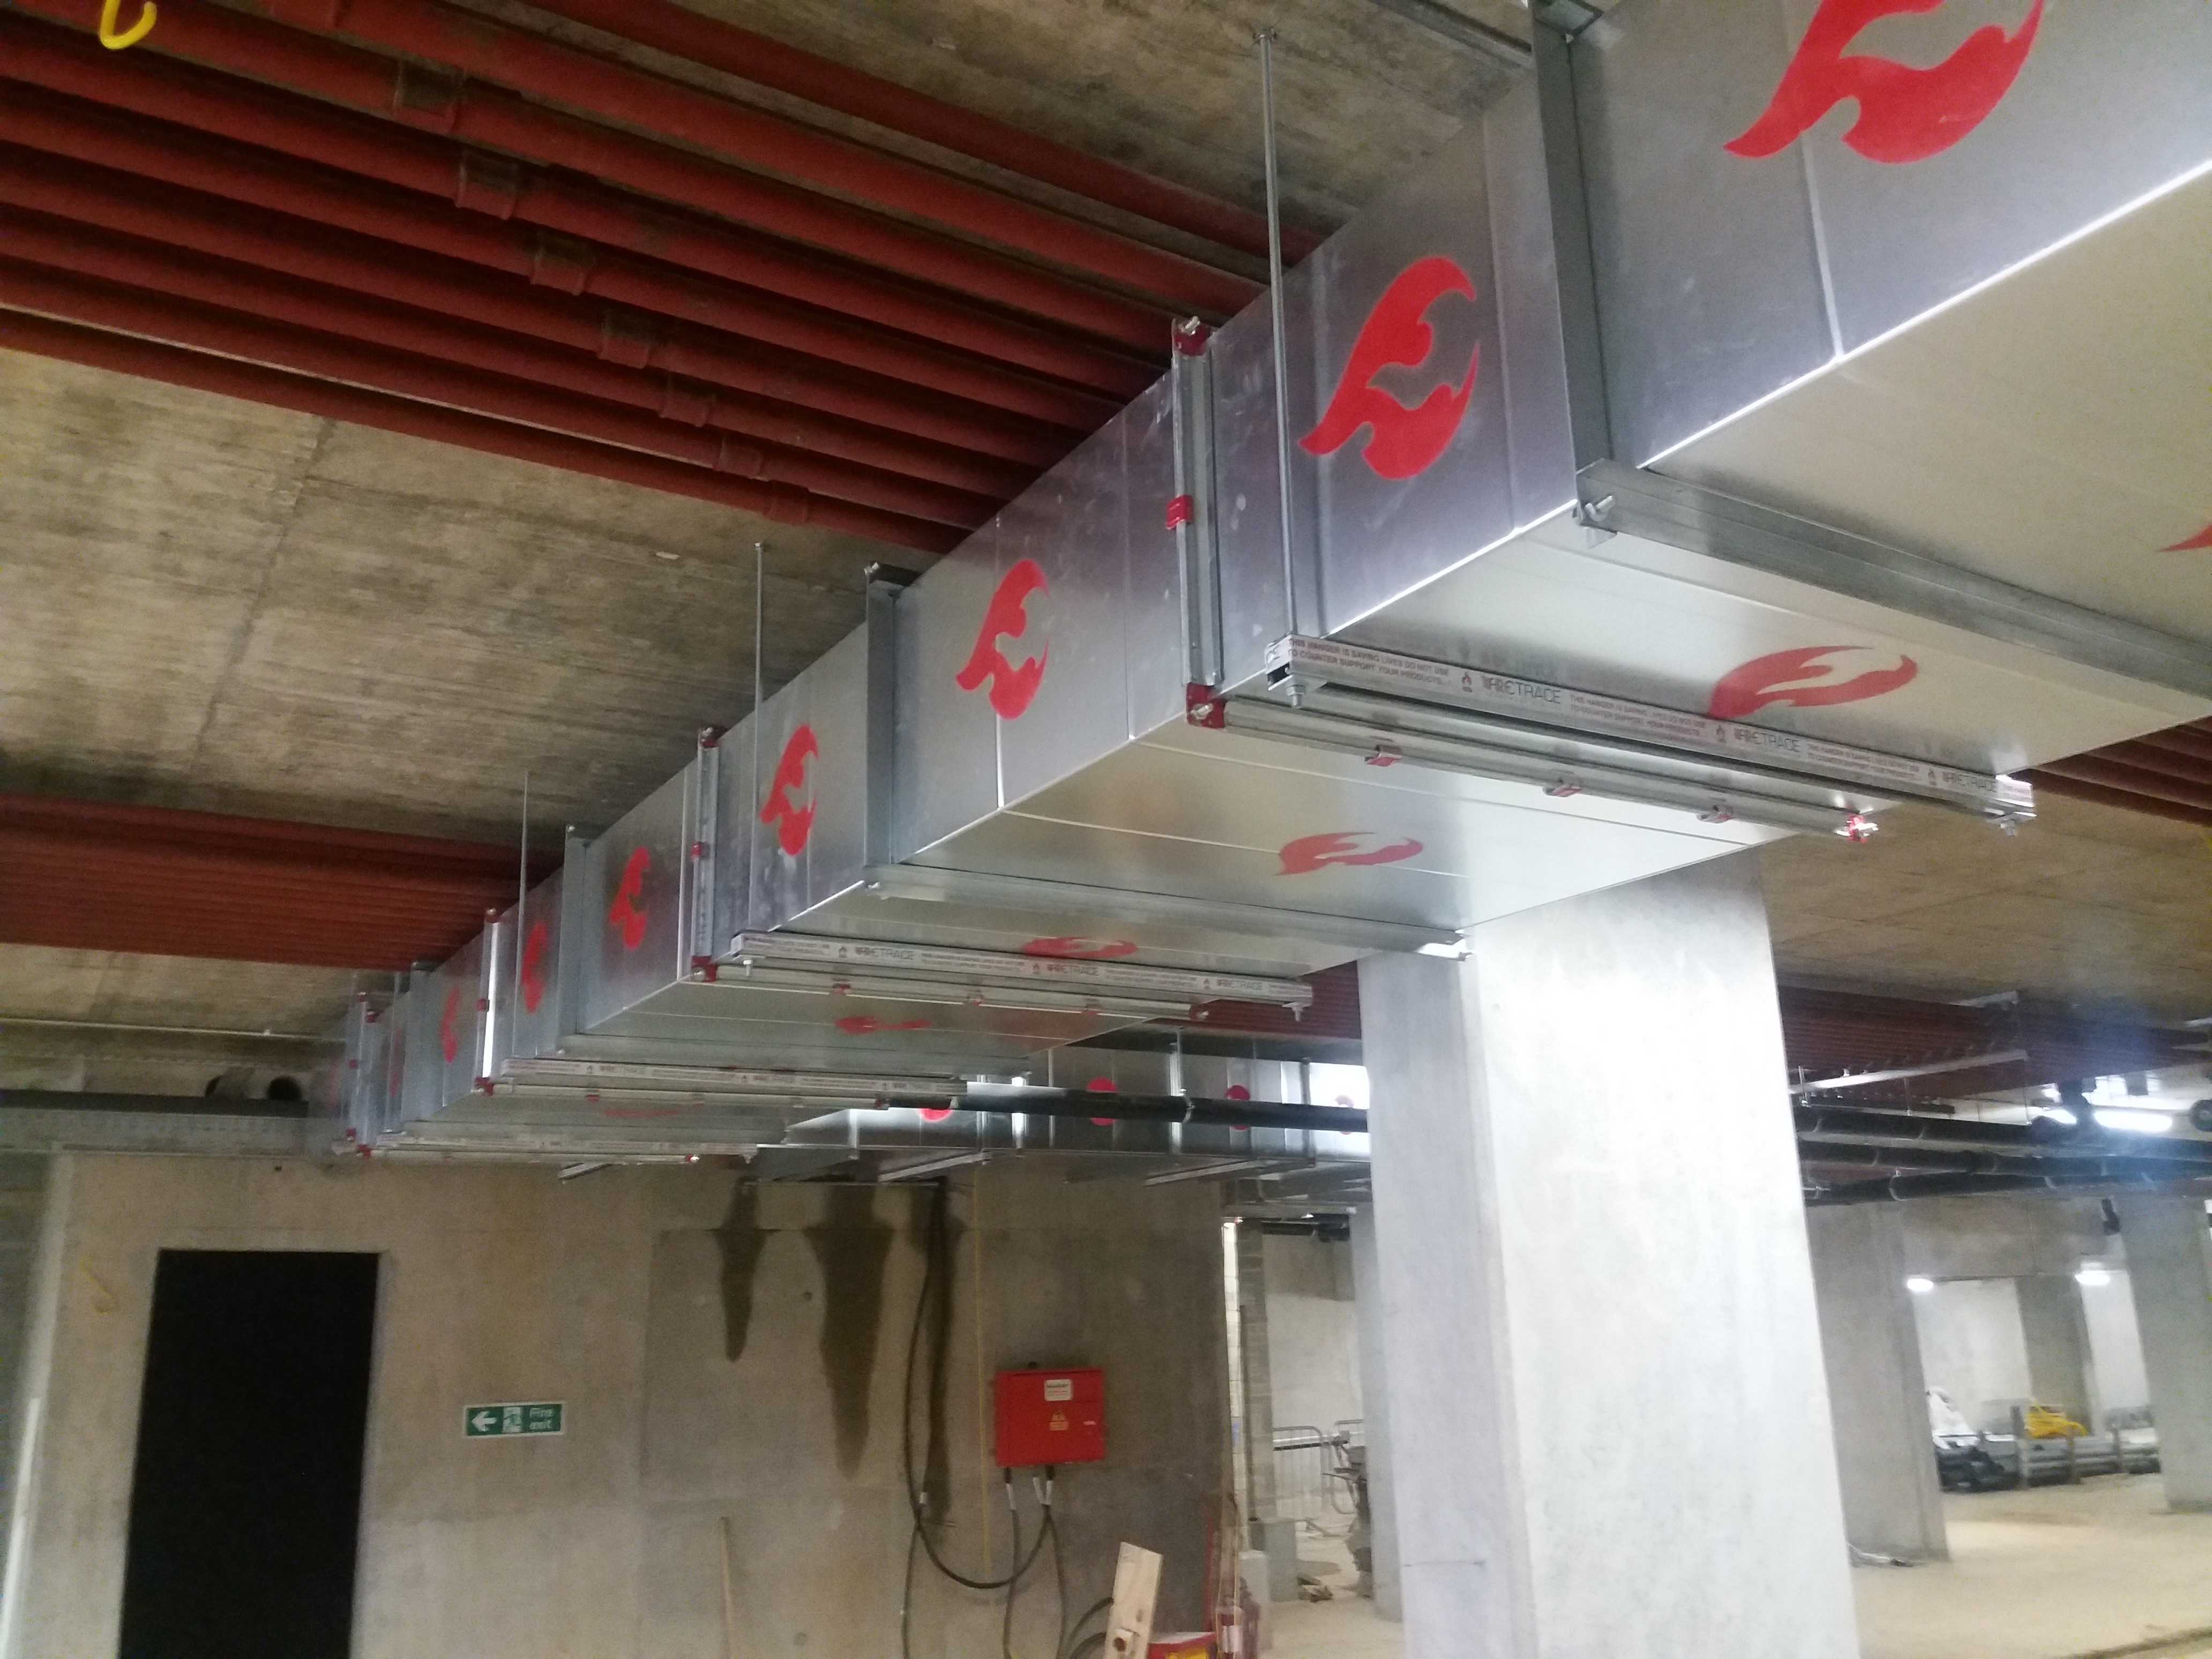 Non Coated Fire Resistant Ductwork